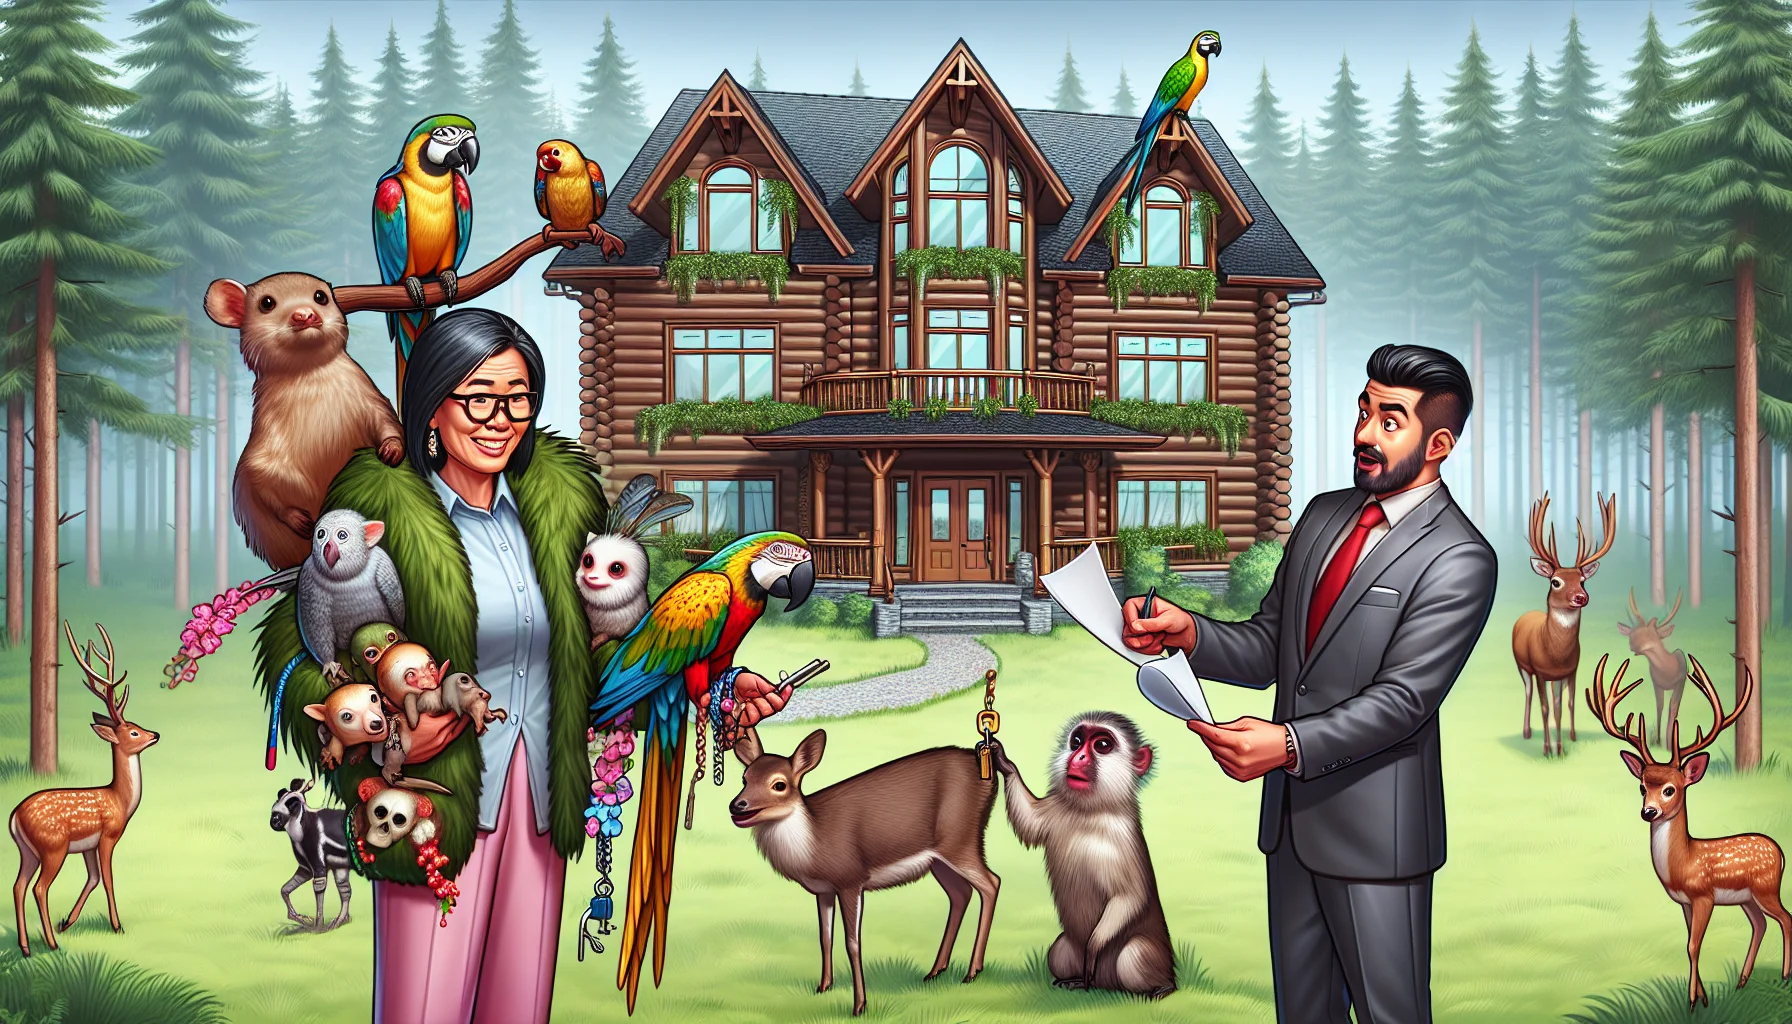 Picture a hilarious and realistic scenario where someone is buying a second home but planning to use it as their primary residence. Imagine a lavishly furnished, fancy log cabin nestled in the middle of a dense forest. The buyer is a middle-aged Asian woman who, comically, is bringing along all her exotic pets - from a parrot on her shoulder to a small monkey helping her sign the papers. A perplexed Hispanic estate agent is handing over the keys, while a deer peeks from the surrounding bushes, adding to the humor of the situation.